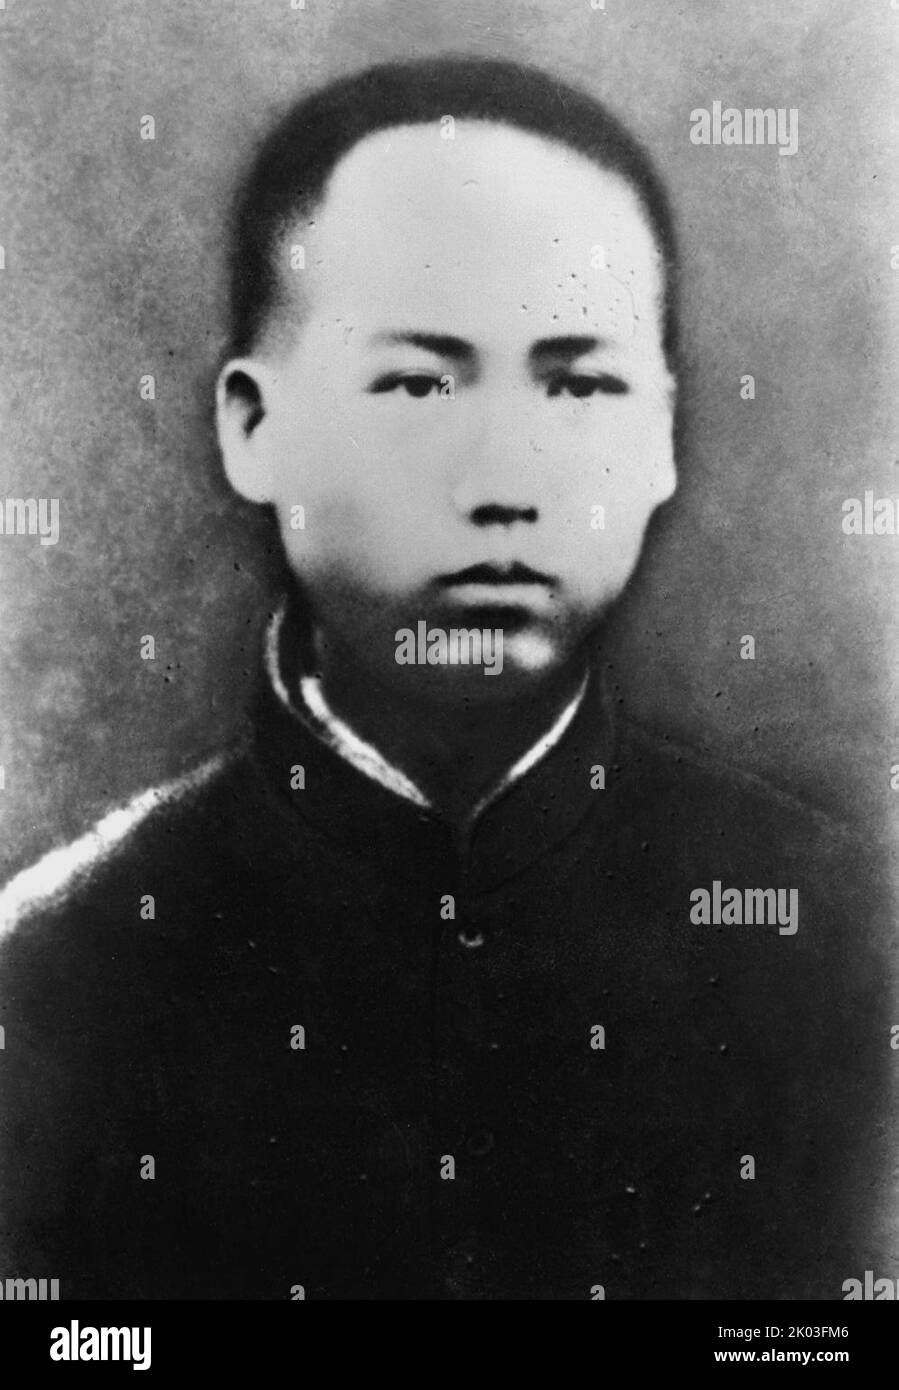 Mao Zedong in 1913. Mao was the leader of the Chinese Communist Party ...